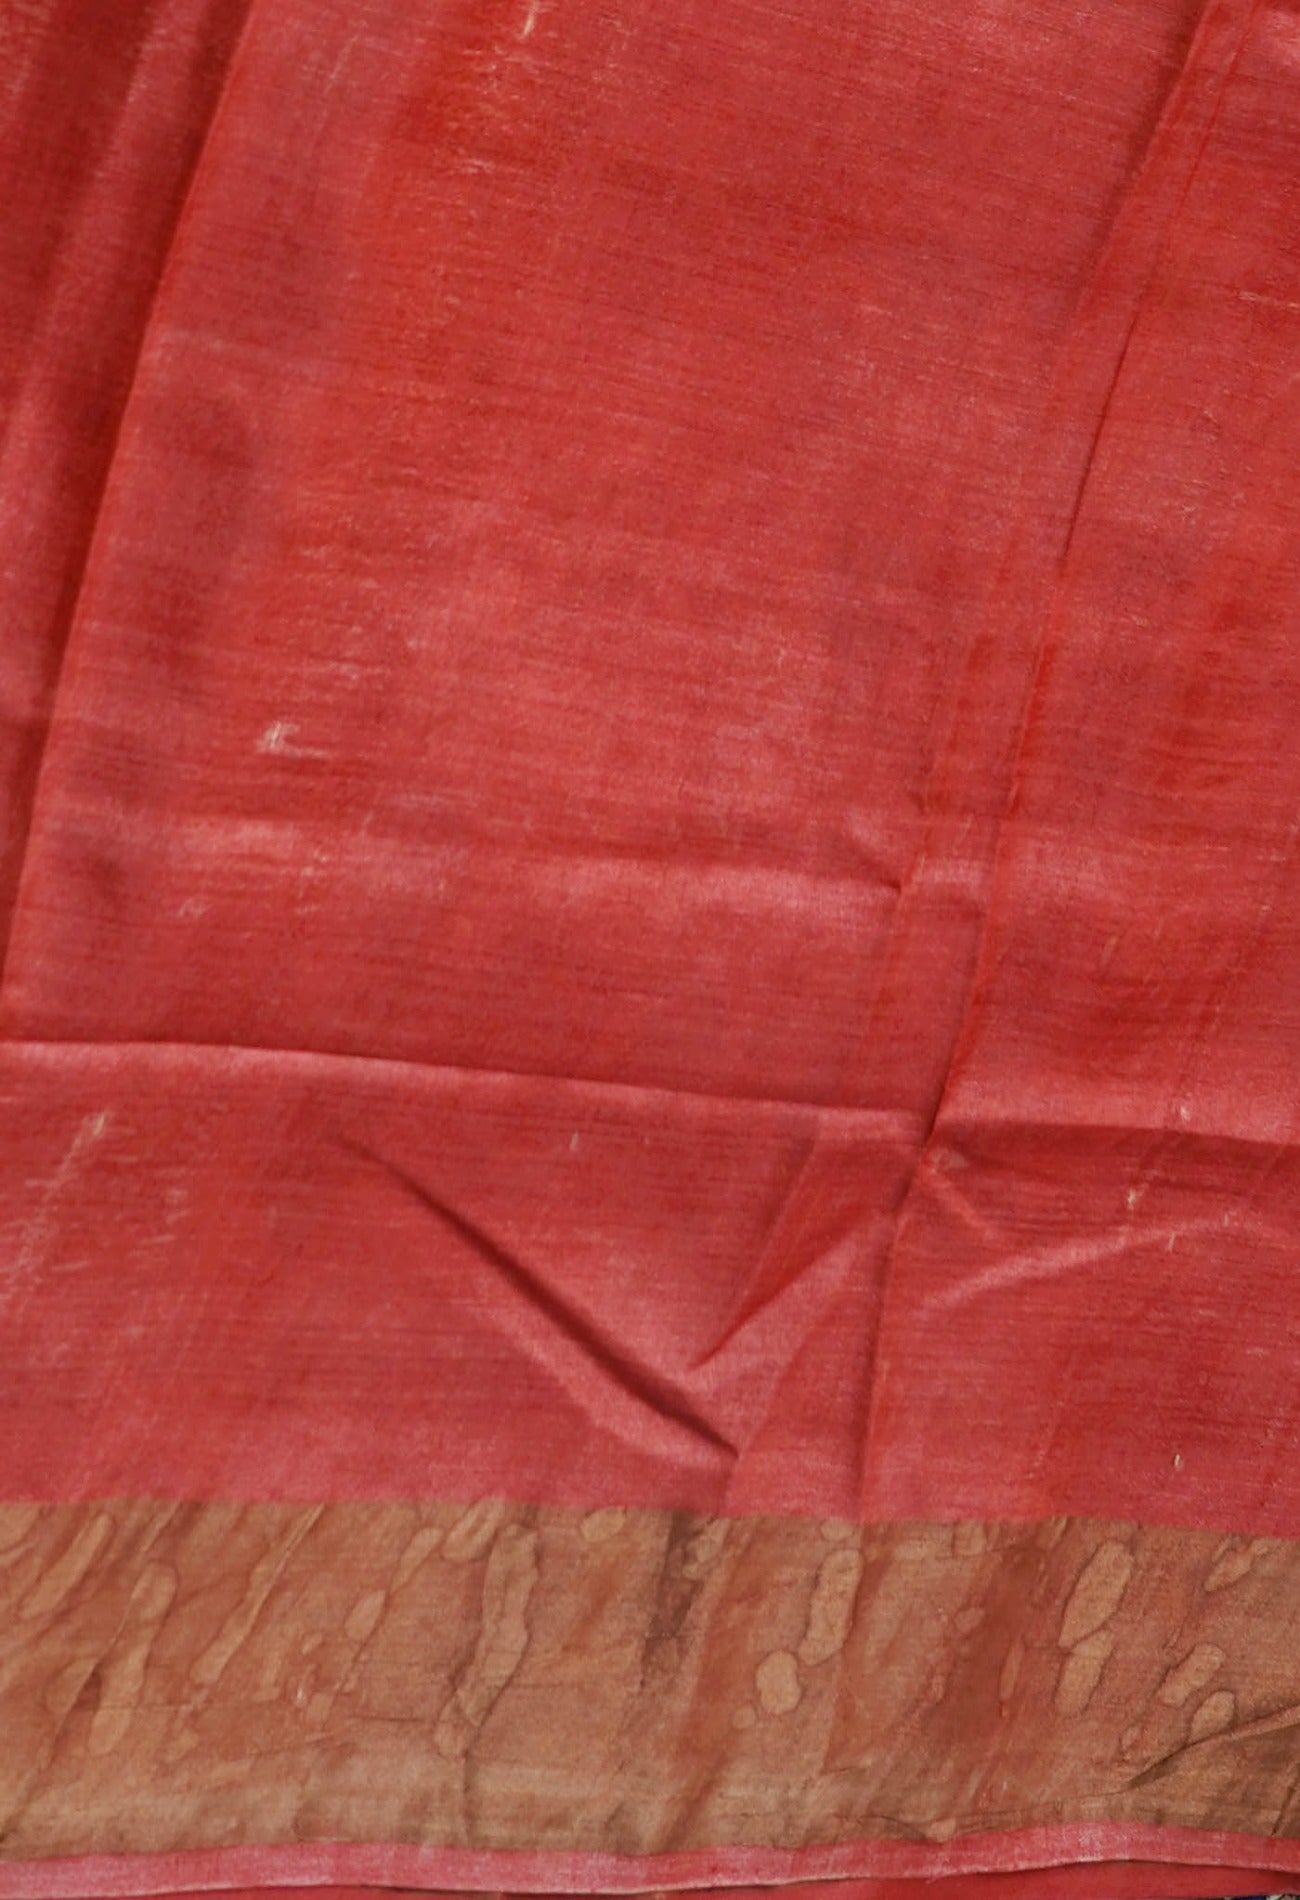 Online Shopping for Orange Pure Handloom Bengal Tussar Silk Saree with Hand Block Prints from West Bengal at Unnatisilks.com India
